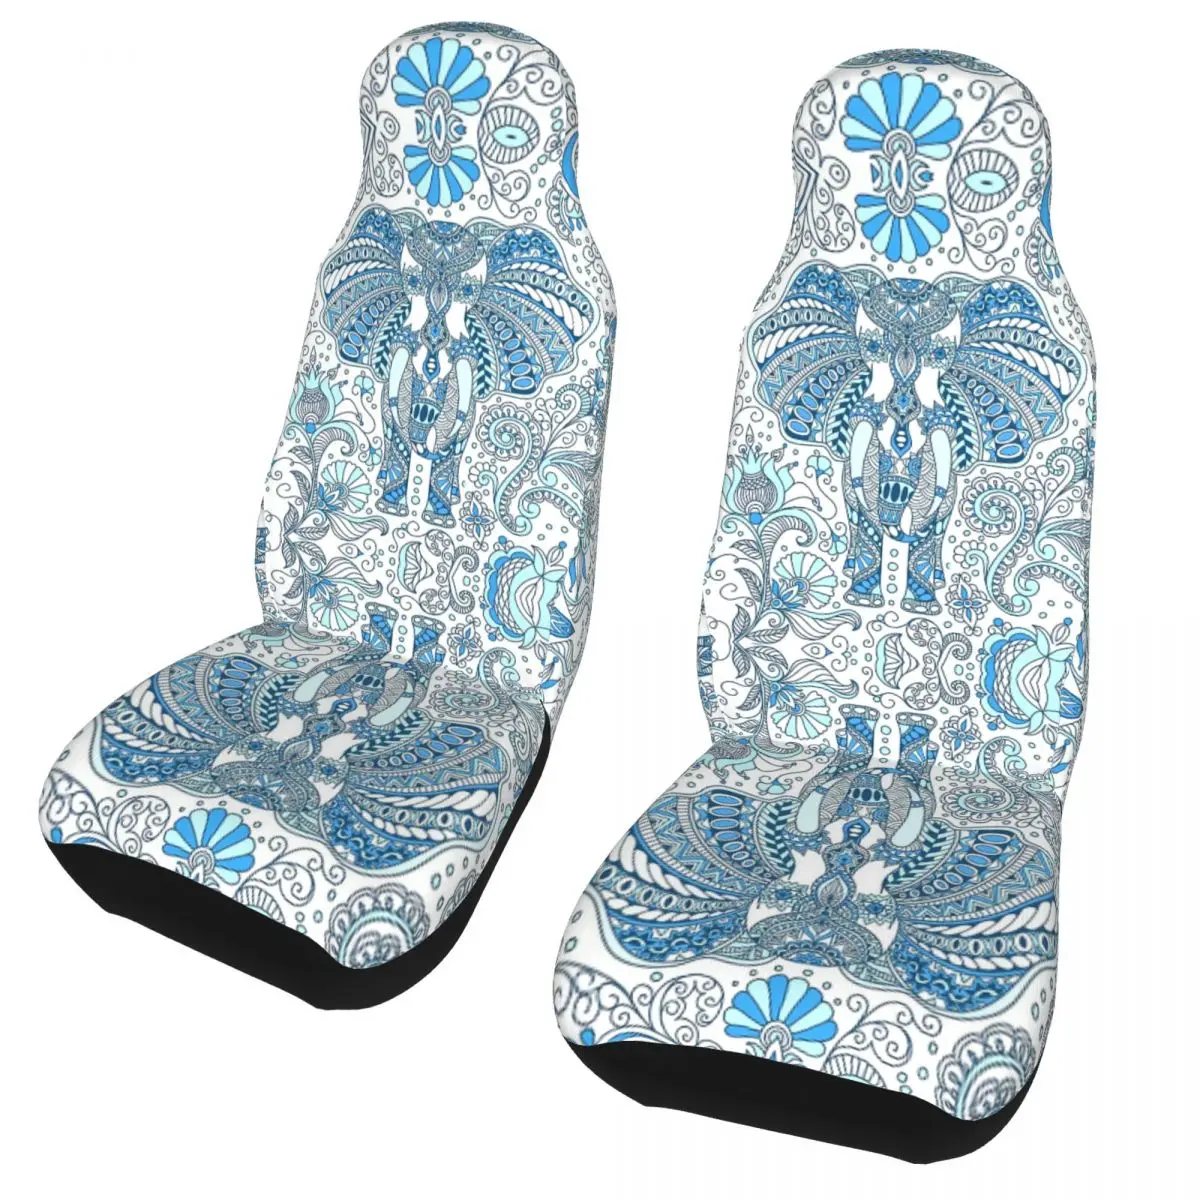 

Indian Elephant Mandala Universal Car Seat Cover for most cars AUTOYOUTH Bohemian Boho Car Seat Protection Covers Fiber Hunting